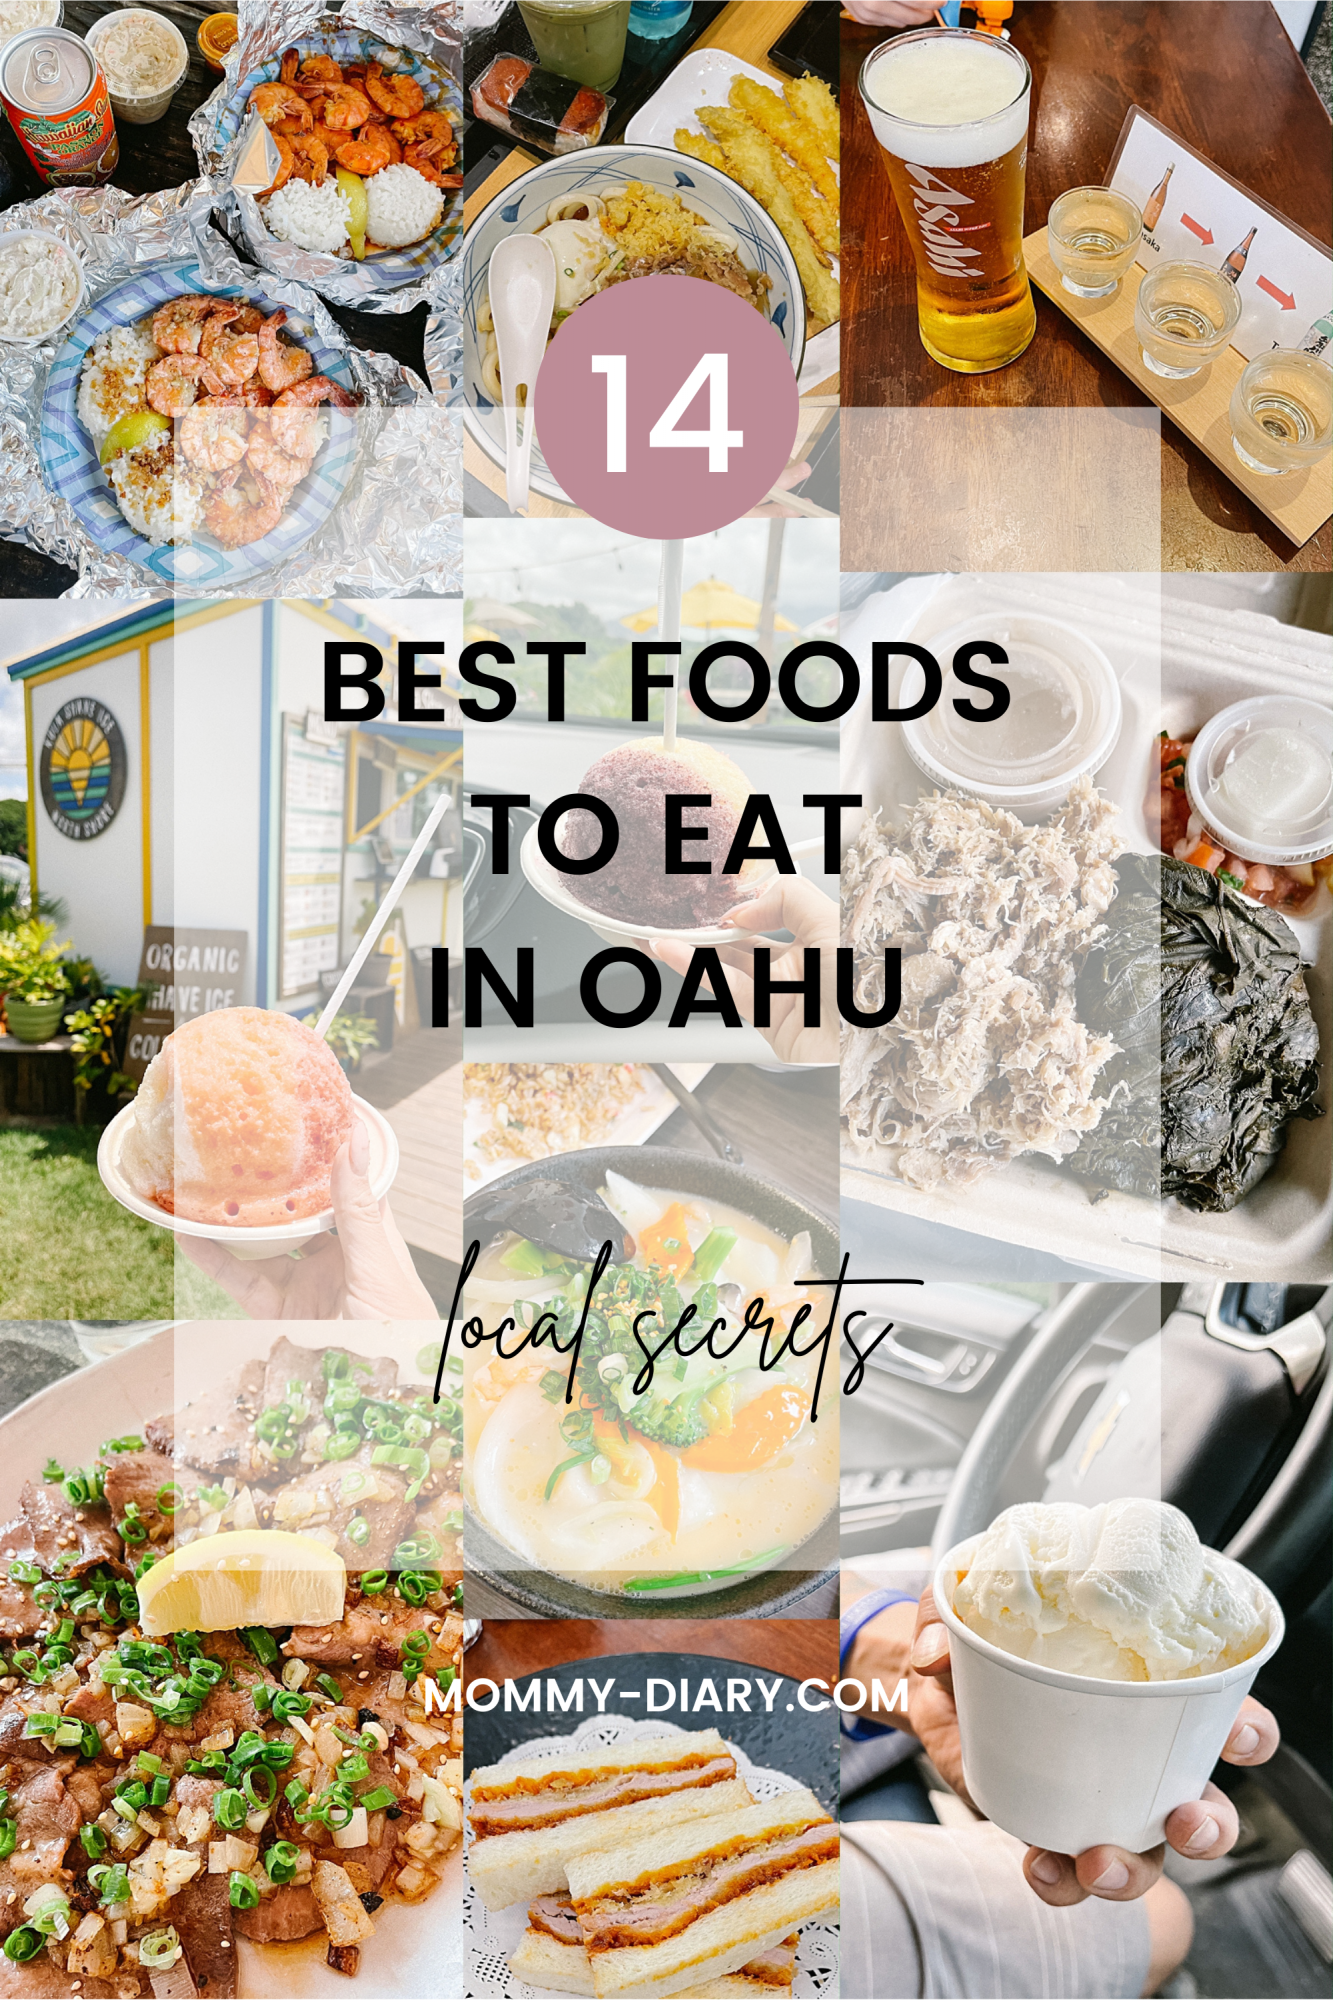 Best Places To Eat In Oahu: Local Favorites